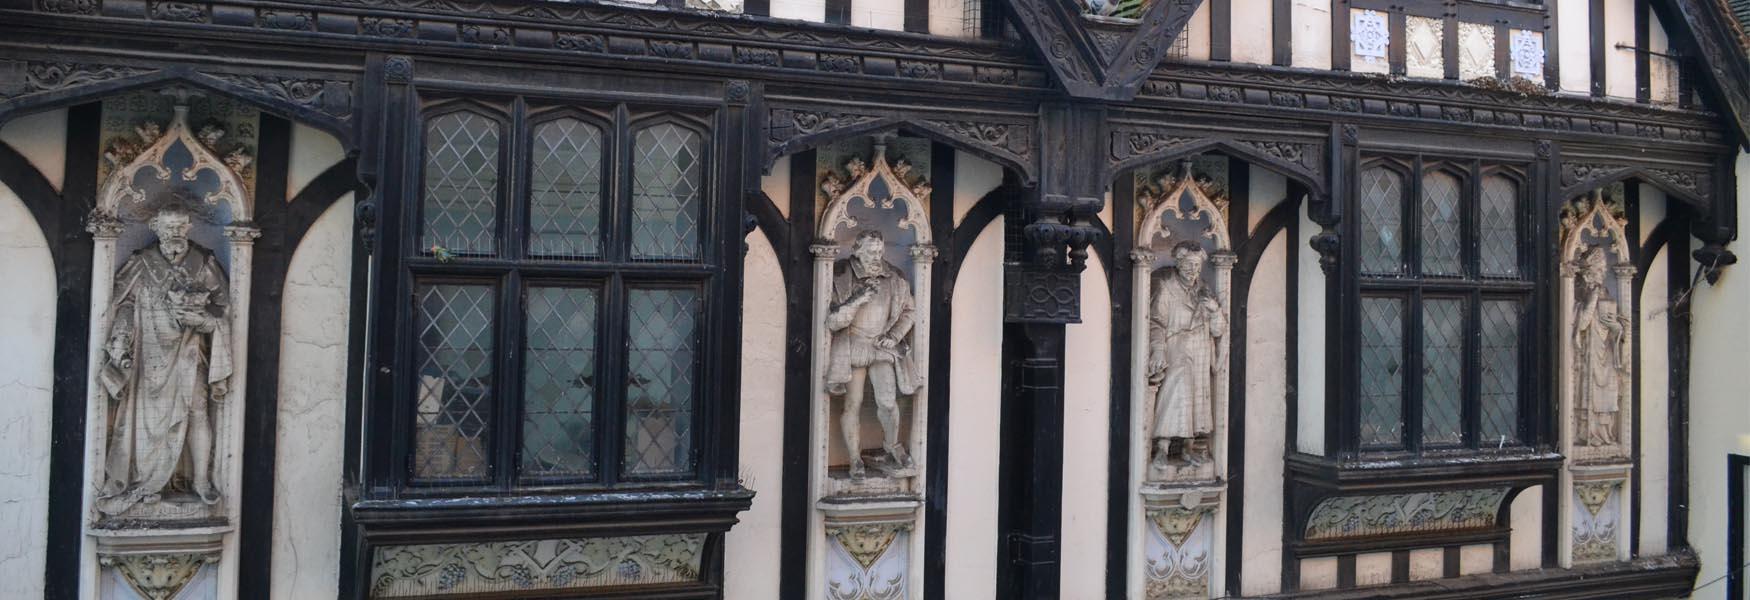 Look up at the buildings in Maidstone and you will find some historical figures above a shop in Bank Street.